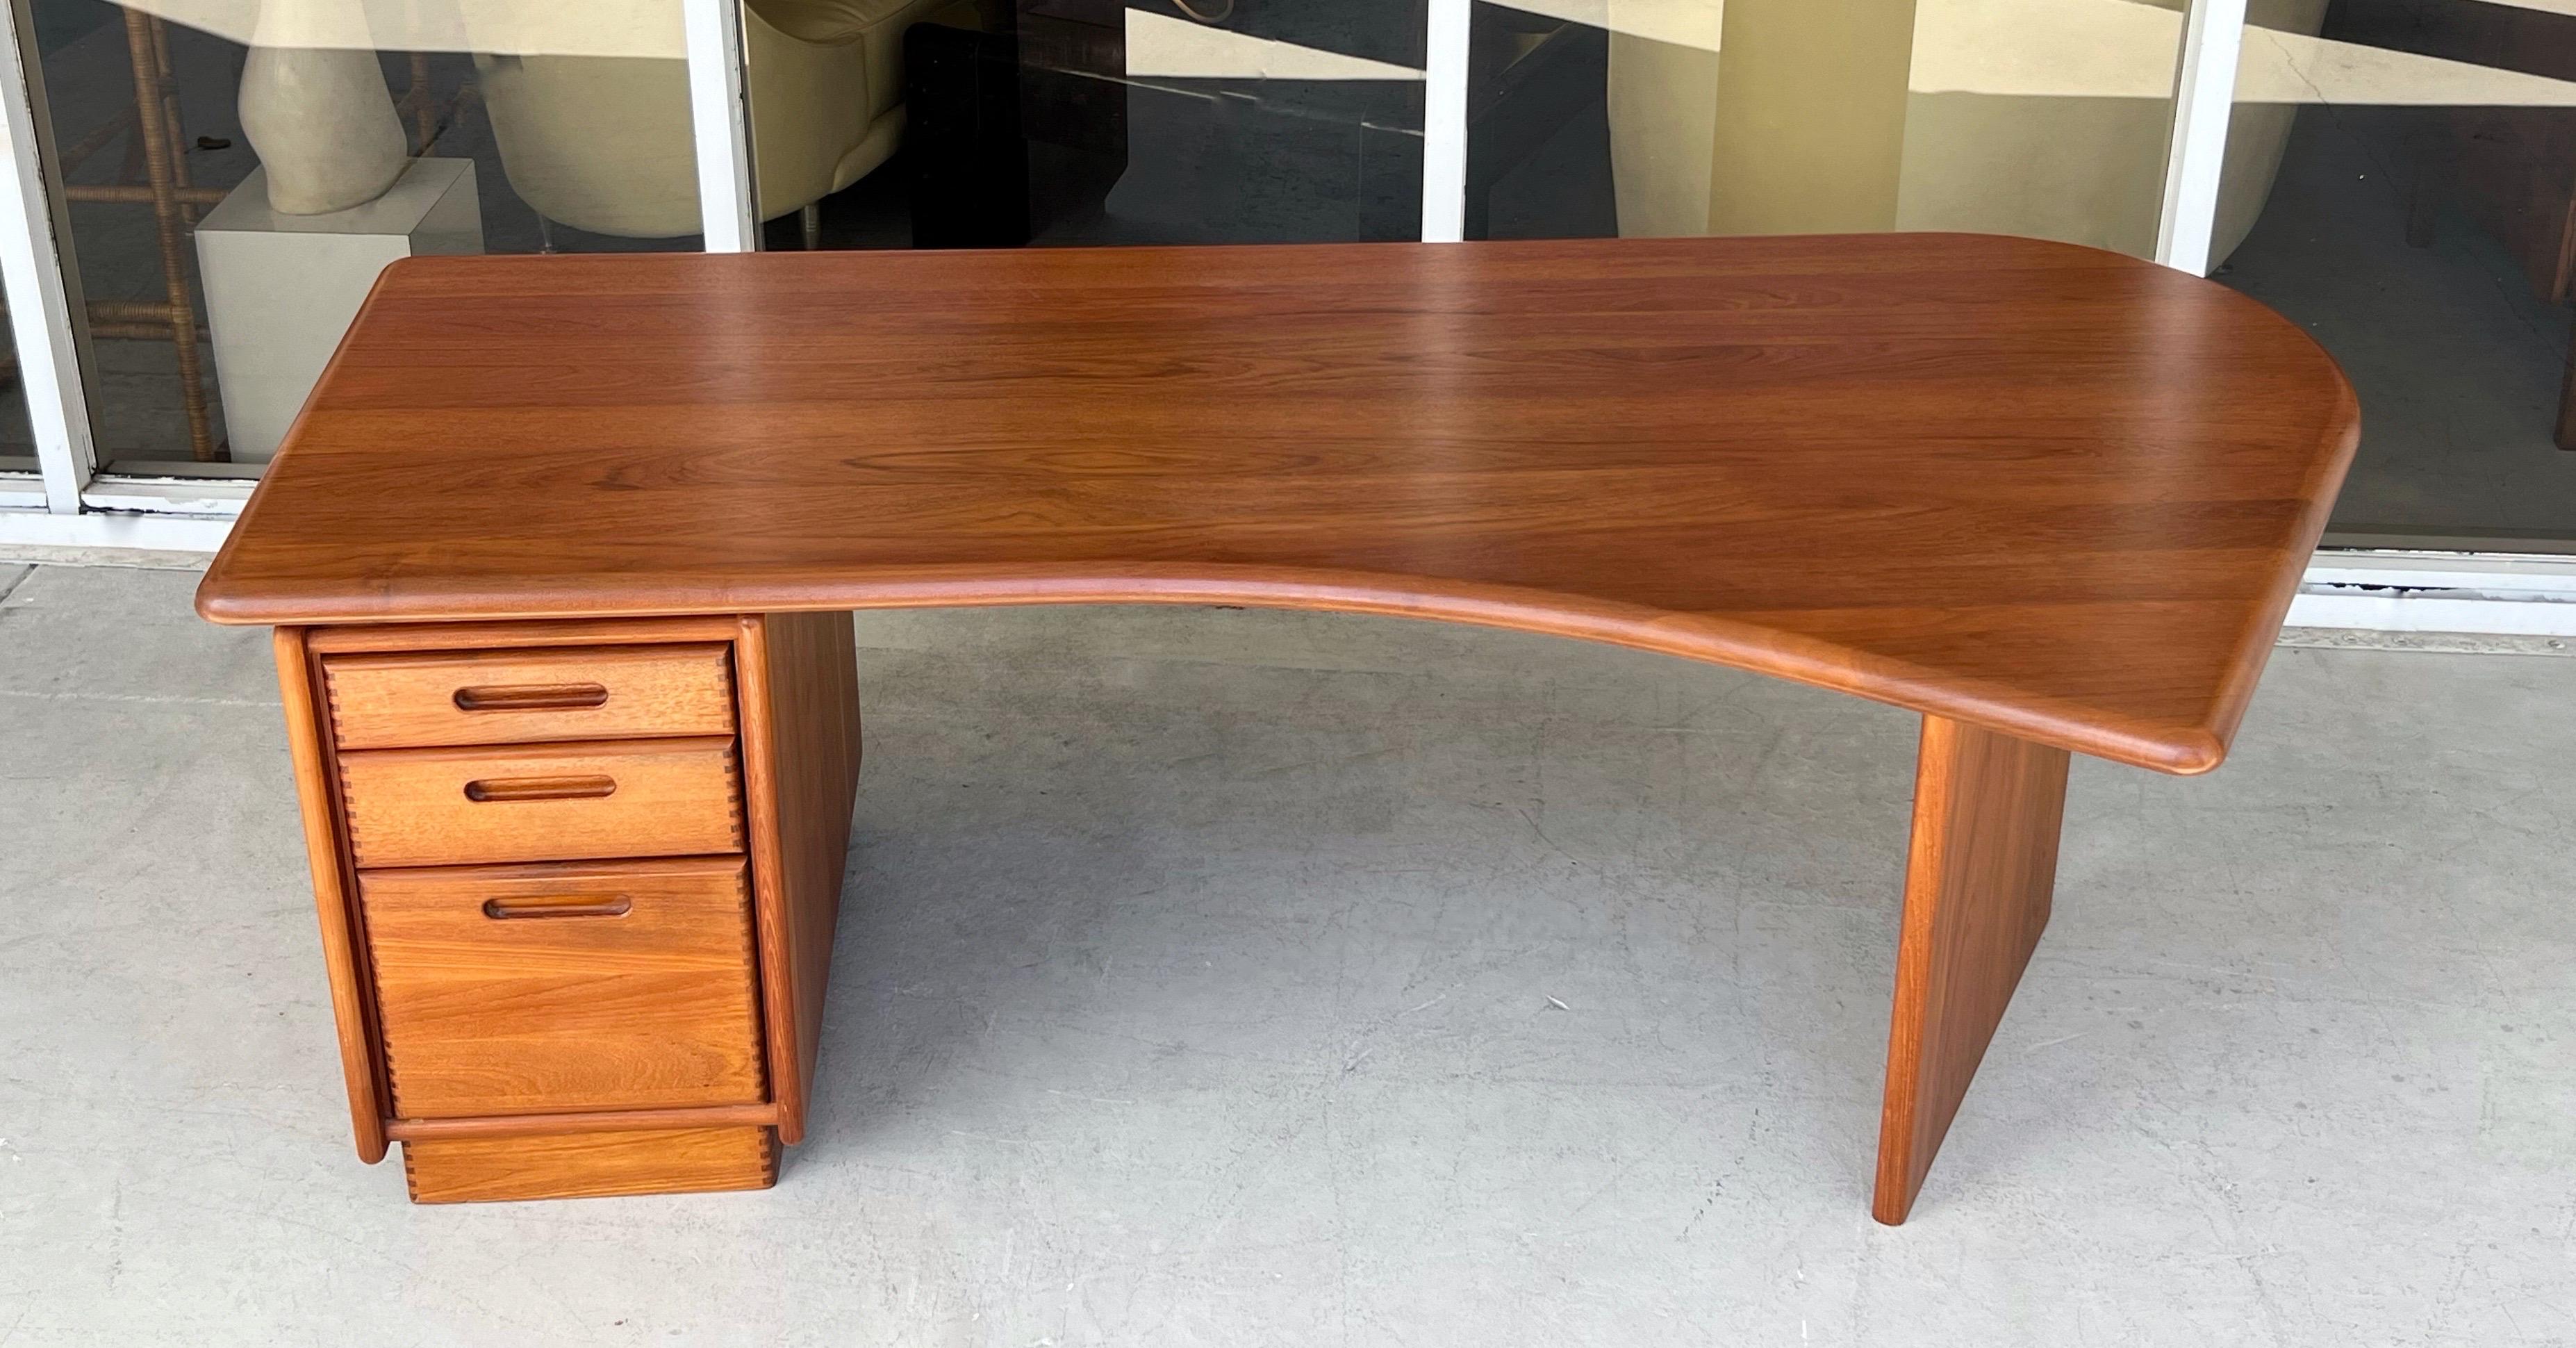 A rare Danish Modern Desk with a biomorphic top. Solid teal construction. 
Note the finger joints on all drawers. 